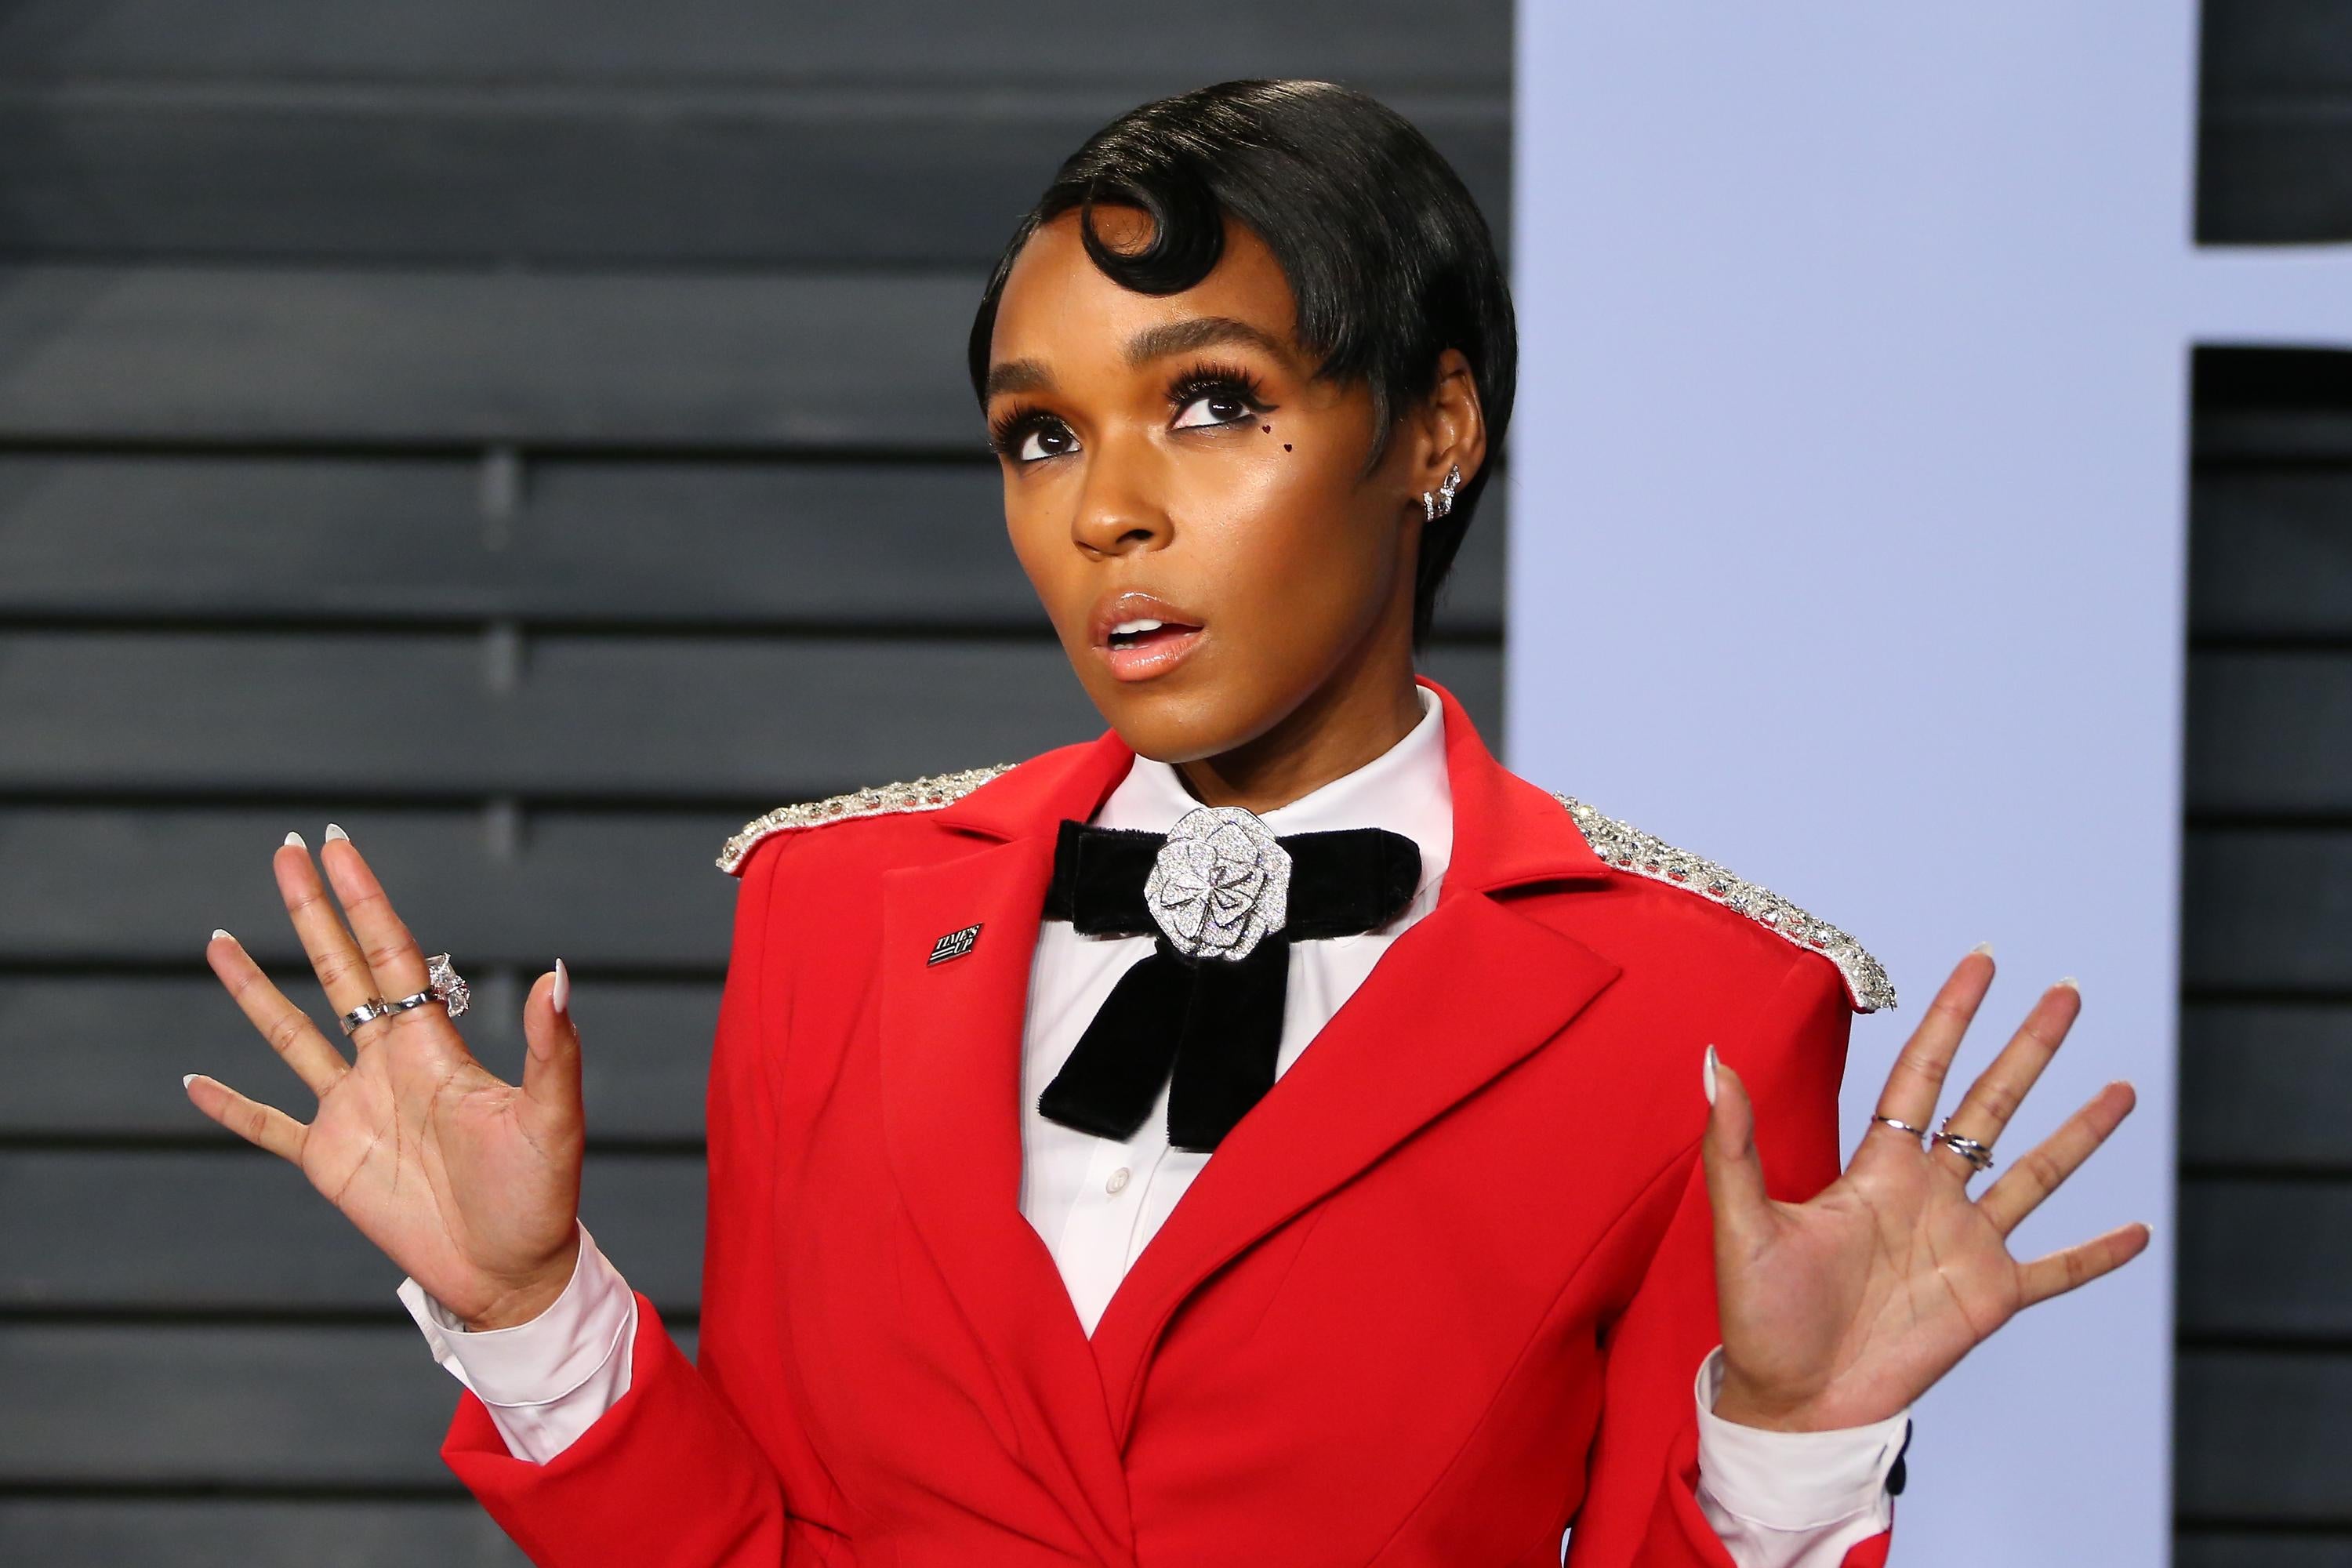 Janelle Monae attends the 2018 Vanity Fair Oscar Party following the 90th Academy Awards at The Wallis Annenberg Center for the Performing Arts in Beverly Hills, California. She wears a red, tailored suit jacket, her short hair slicked into a curl.